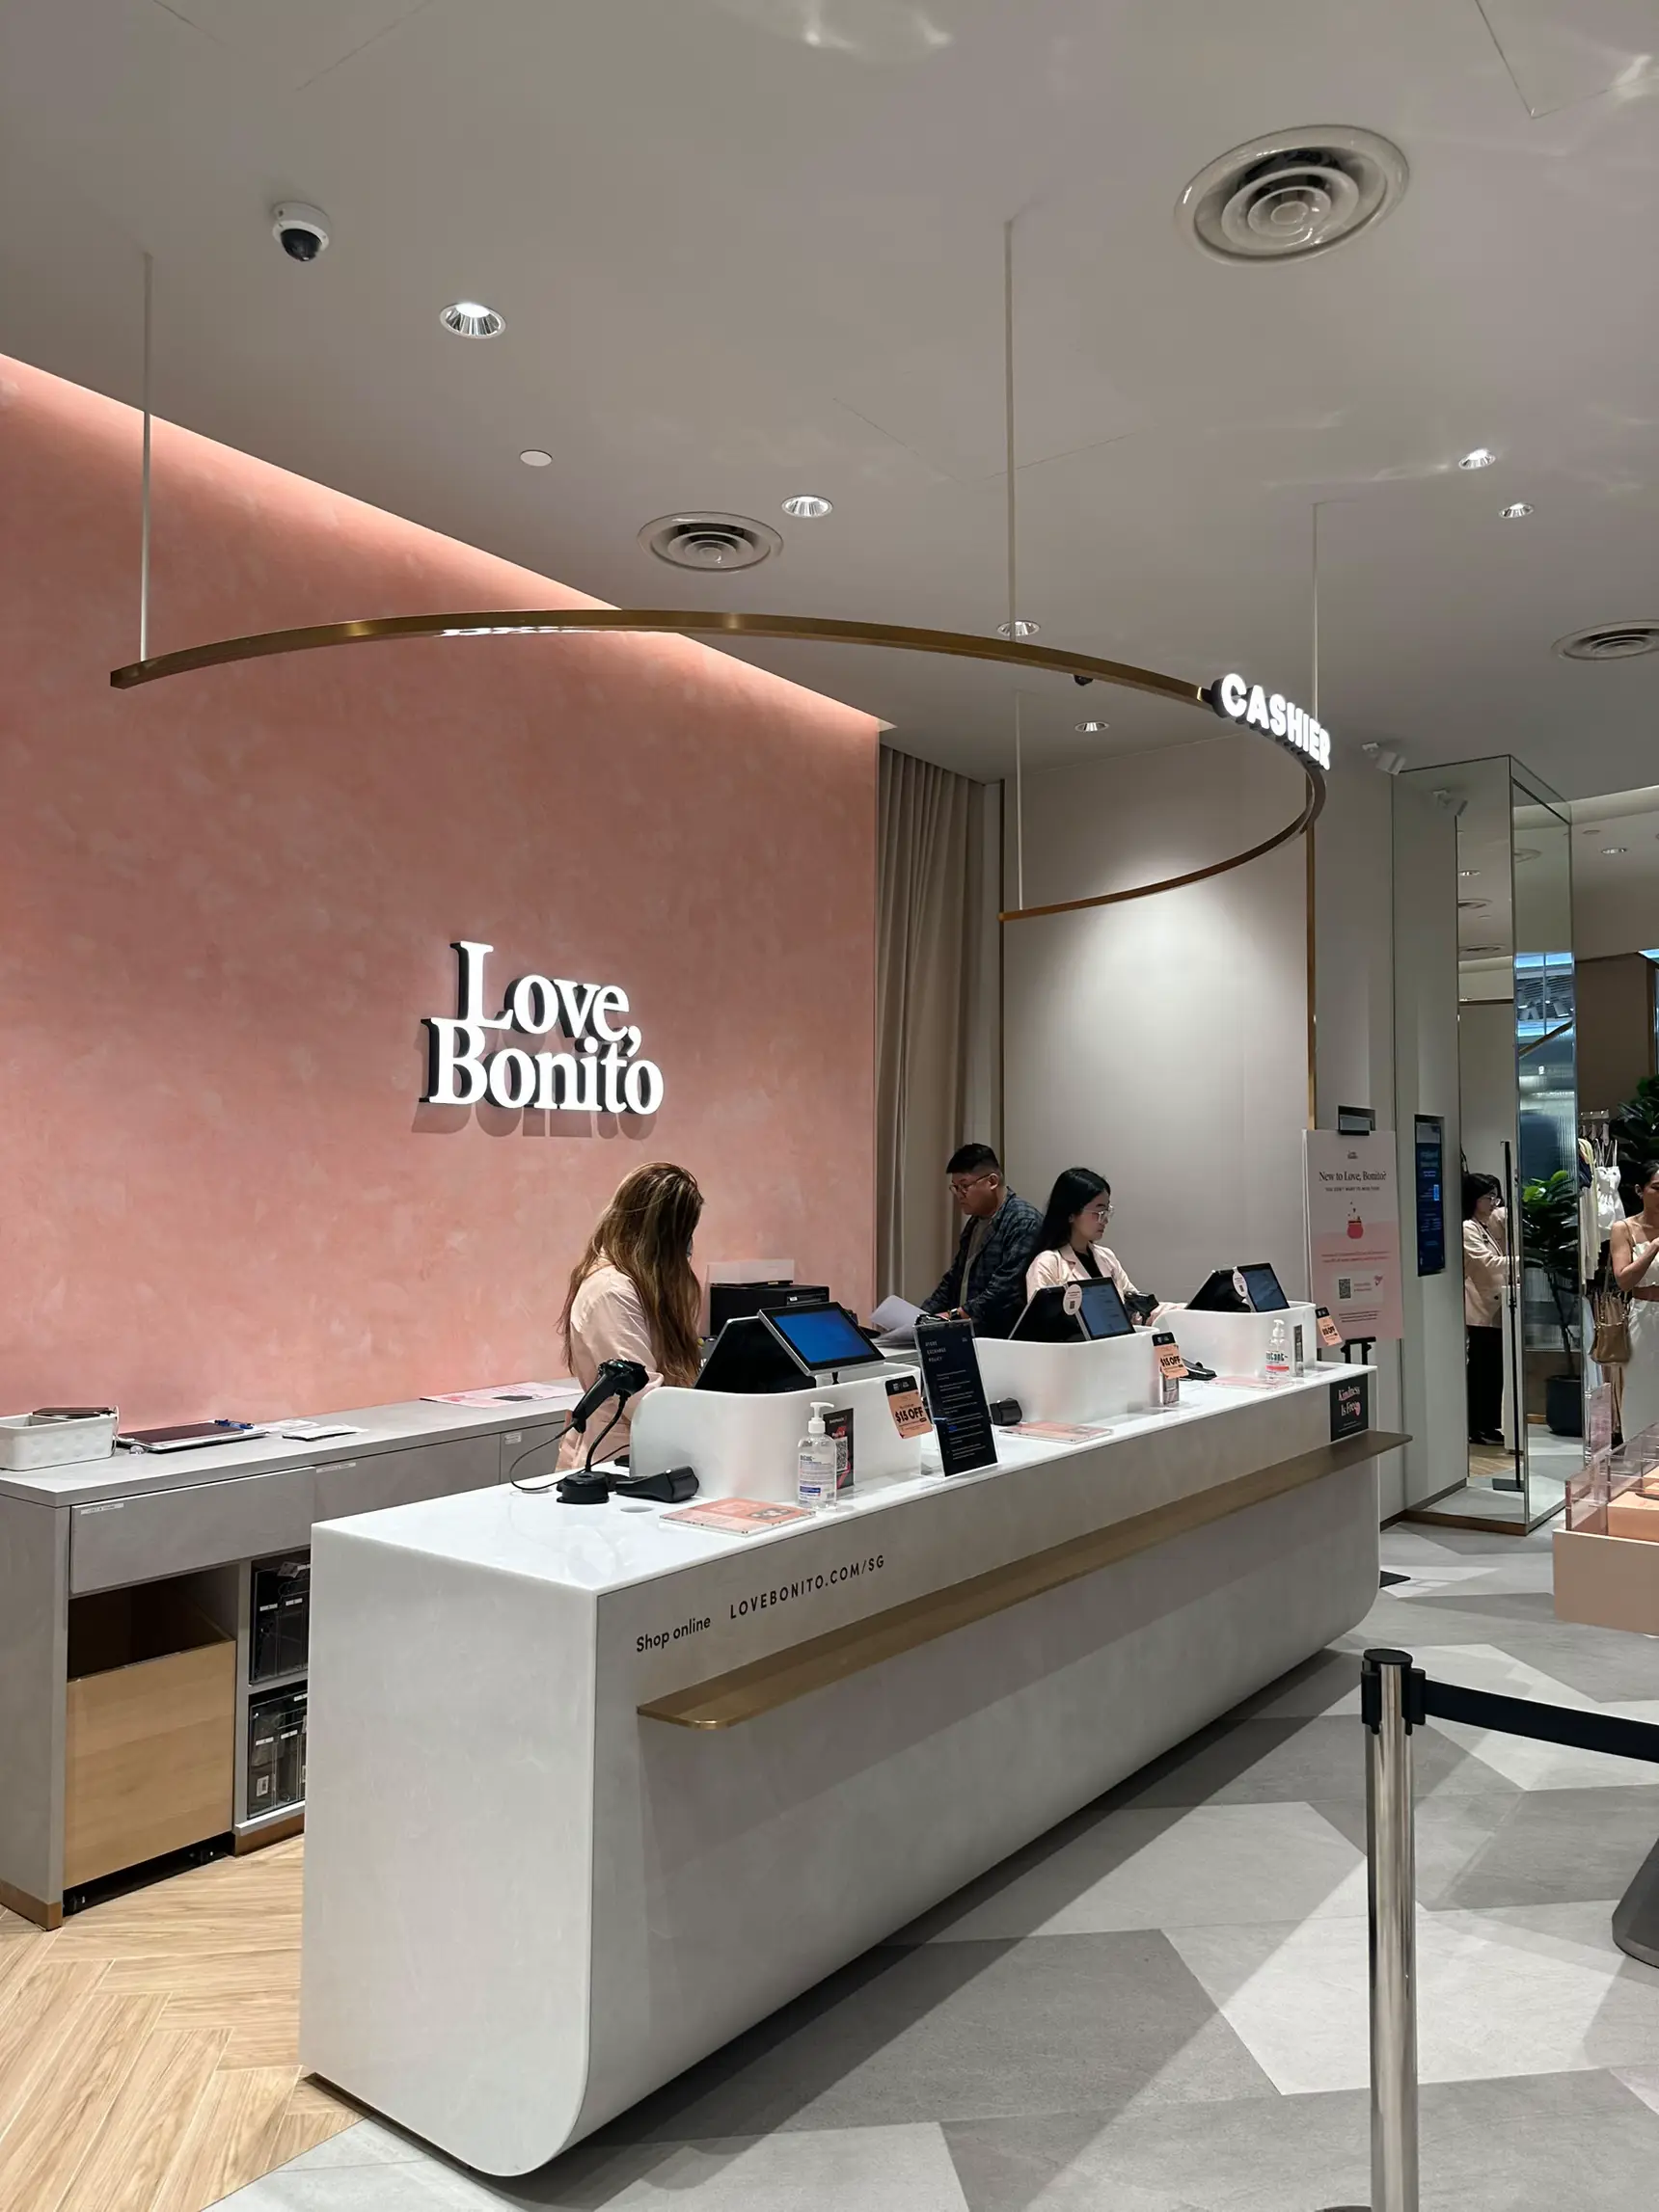 Online retailer Love, Bonito opens first flagship store